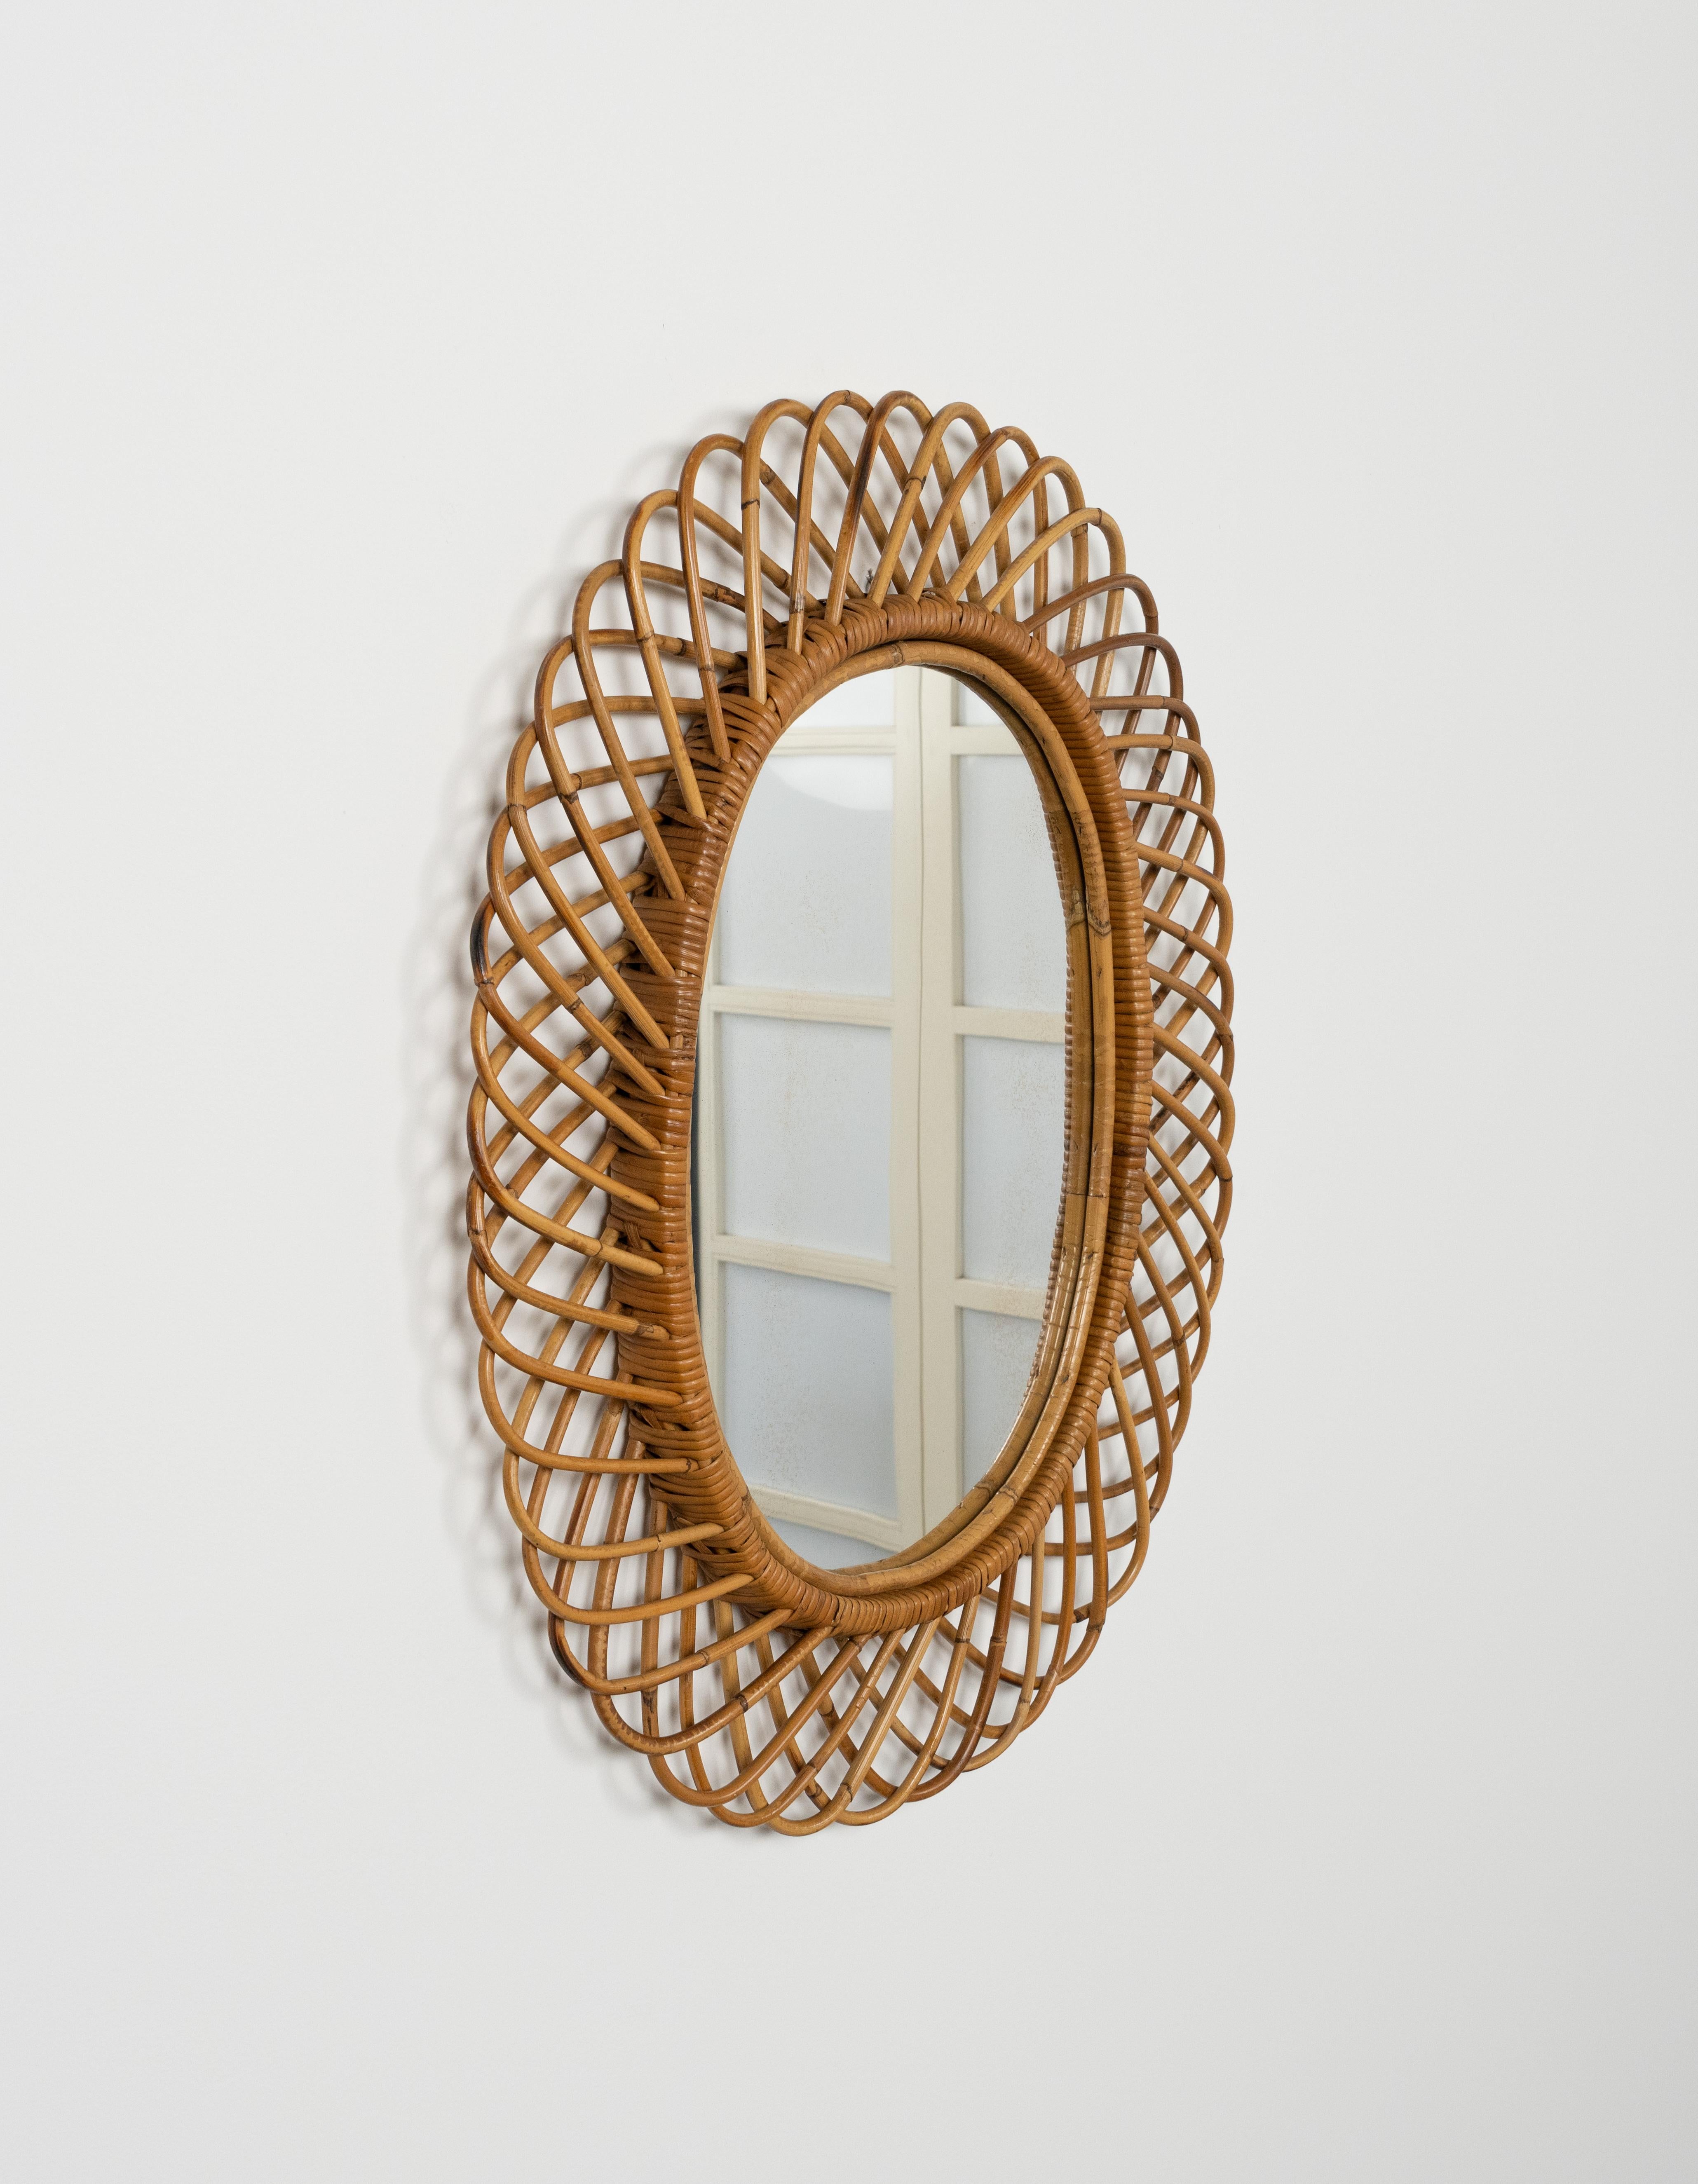 Midcentury beautiful oval wall mirror in bamboo and rattan by Franco Albini. 

Made in Italy in the 1960s.

The mirror, original of the period, shows small signs of discolouration.

The mirror would be perfect for a bedroom, dressing room, cloakroom